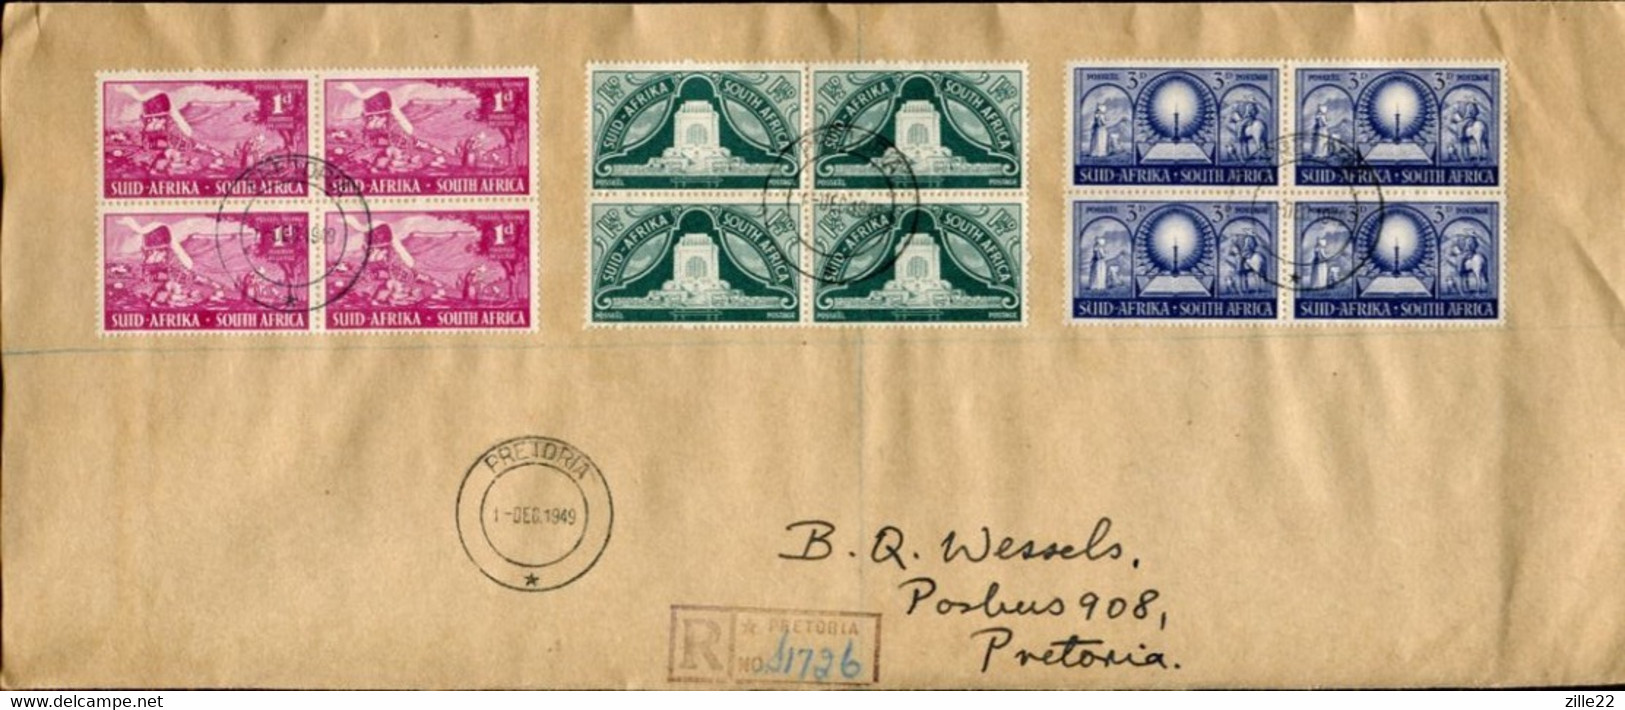 South Africa Südafrika Mi# 217-9 Used On Letter Or FDC -  Inauguration Of The Vortrekker Monument - European Settlers - FDC